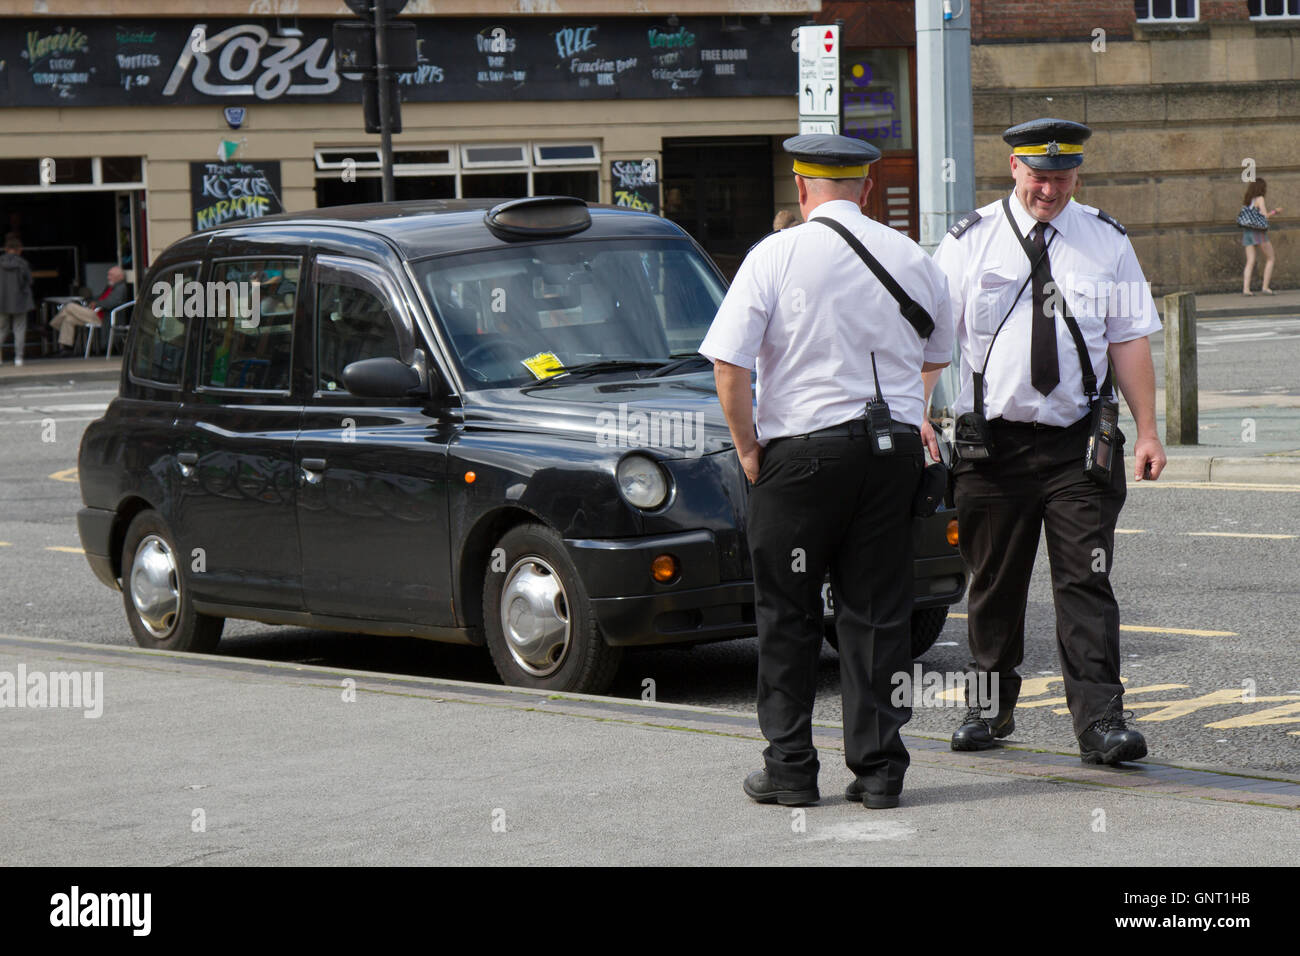 Black Cab given penalty notice by Traffic Wardens for a parking violation near Greater Williamson Square, Liverpool, Merseyside, UKK Stock Photo